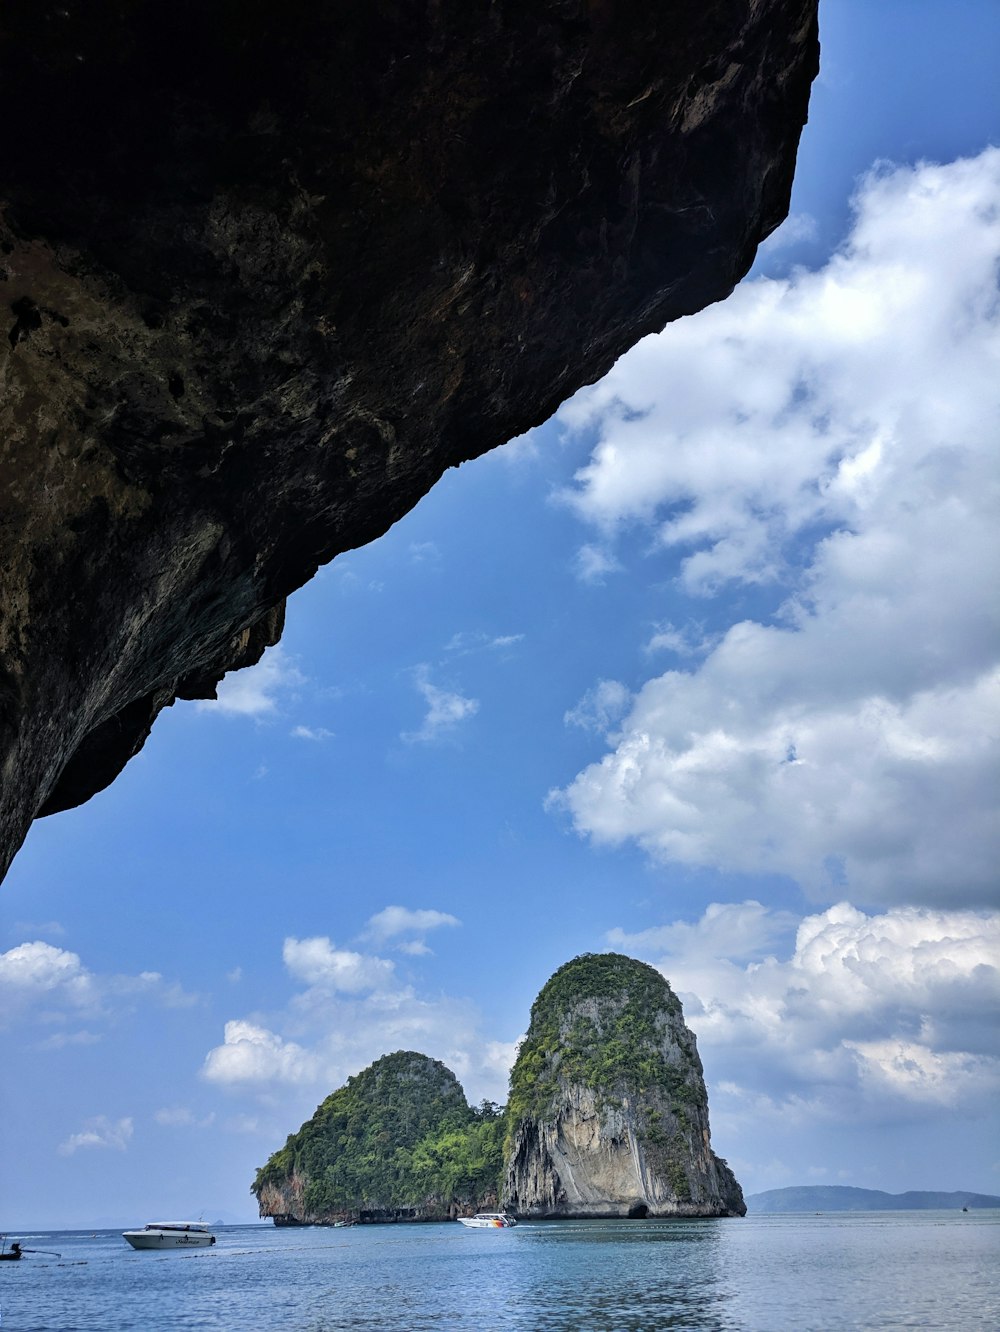 brown rock formation under blue sky and white clouds during daytime